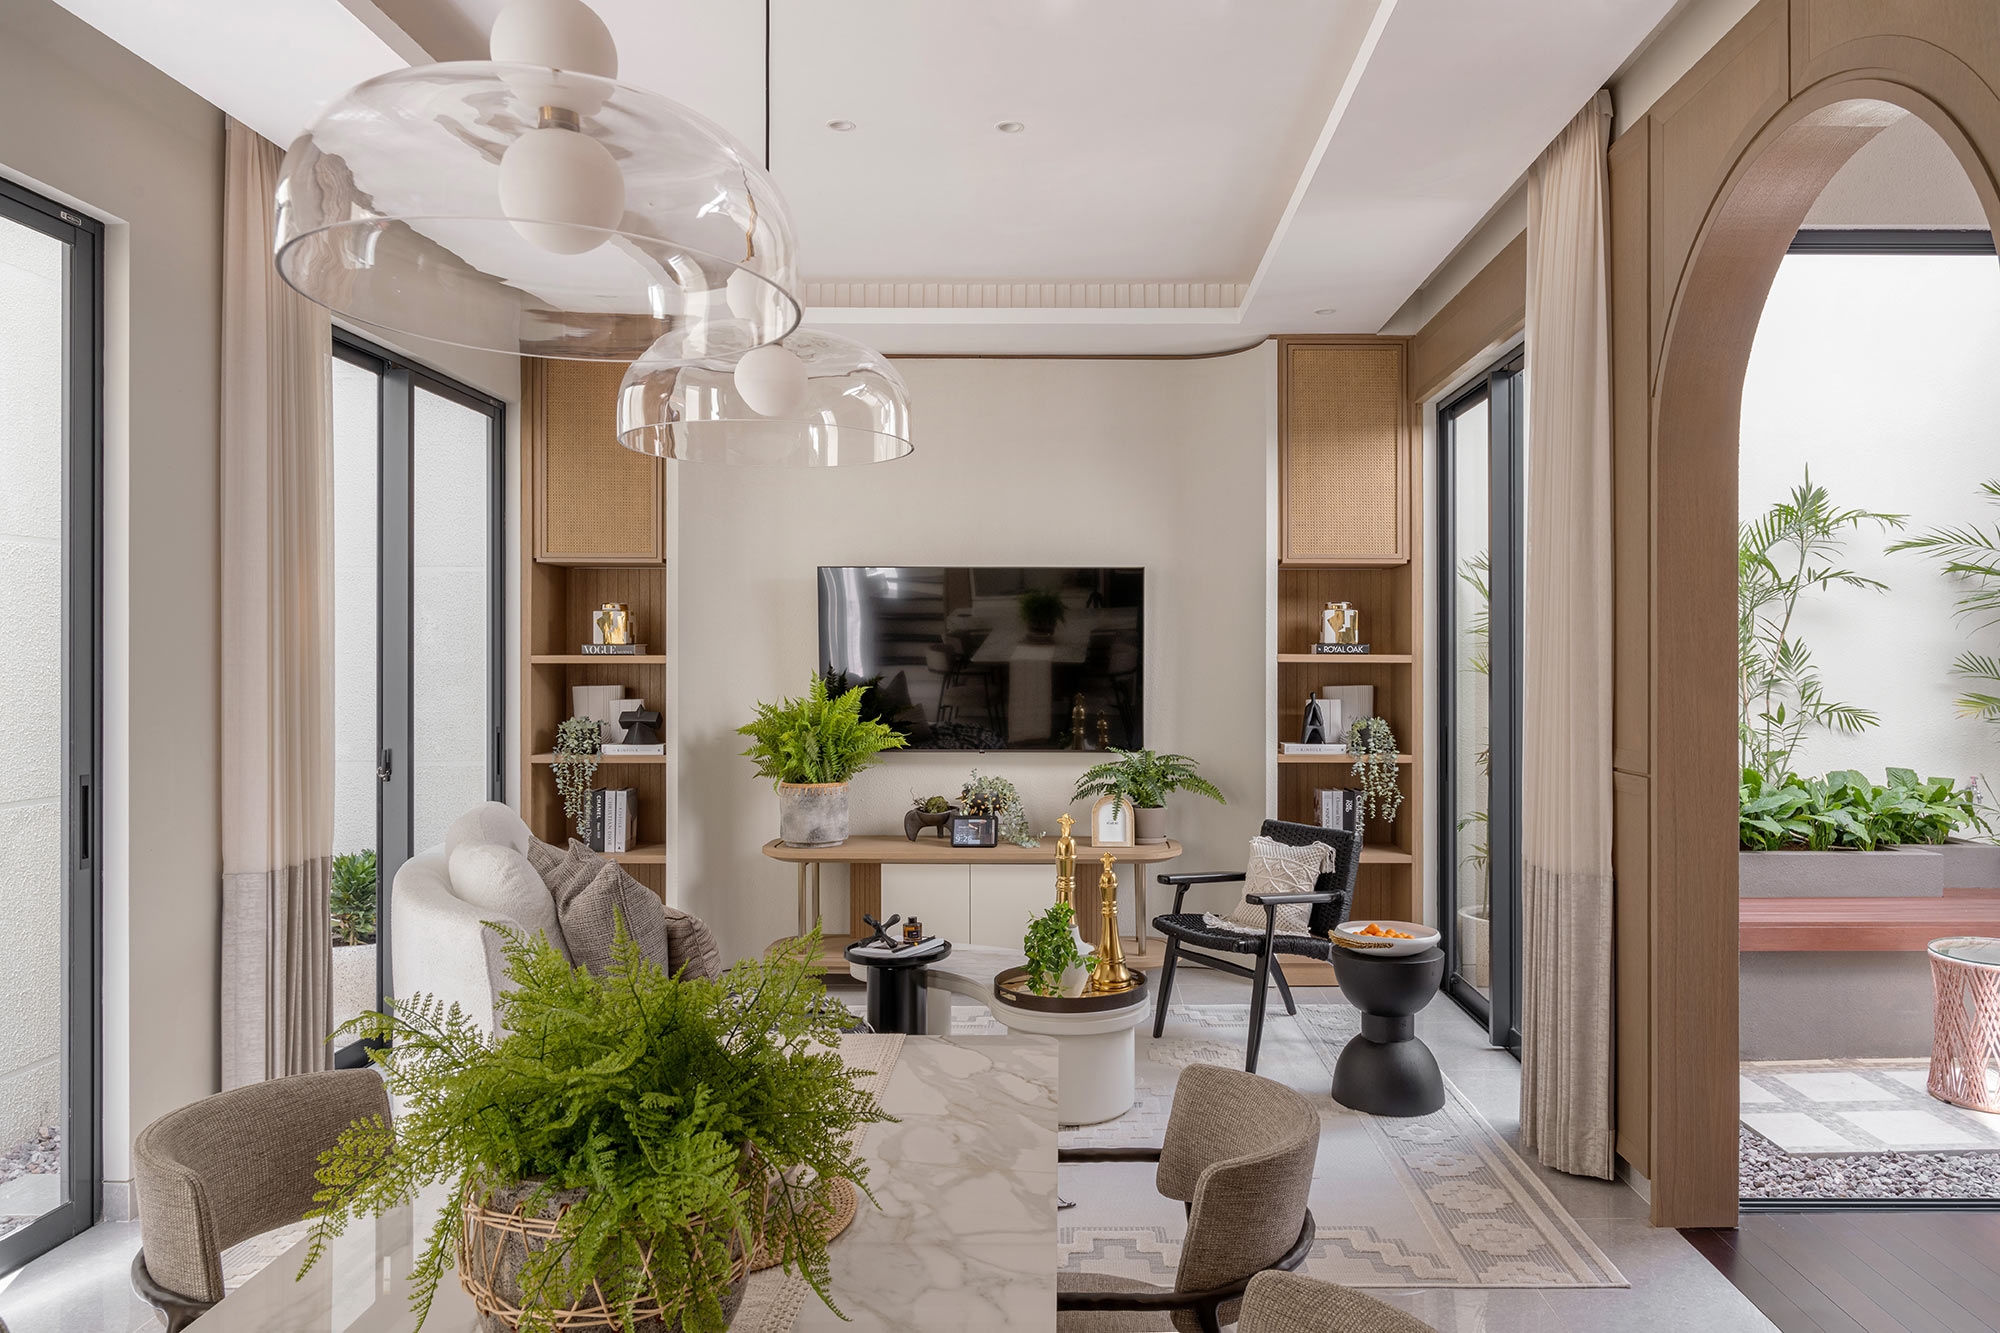 Image of Showhome by Align 3 in A modern cuisine that looks to tradition - Cosentino